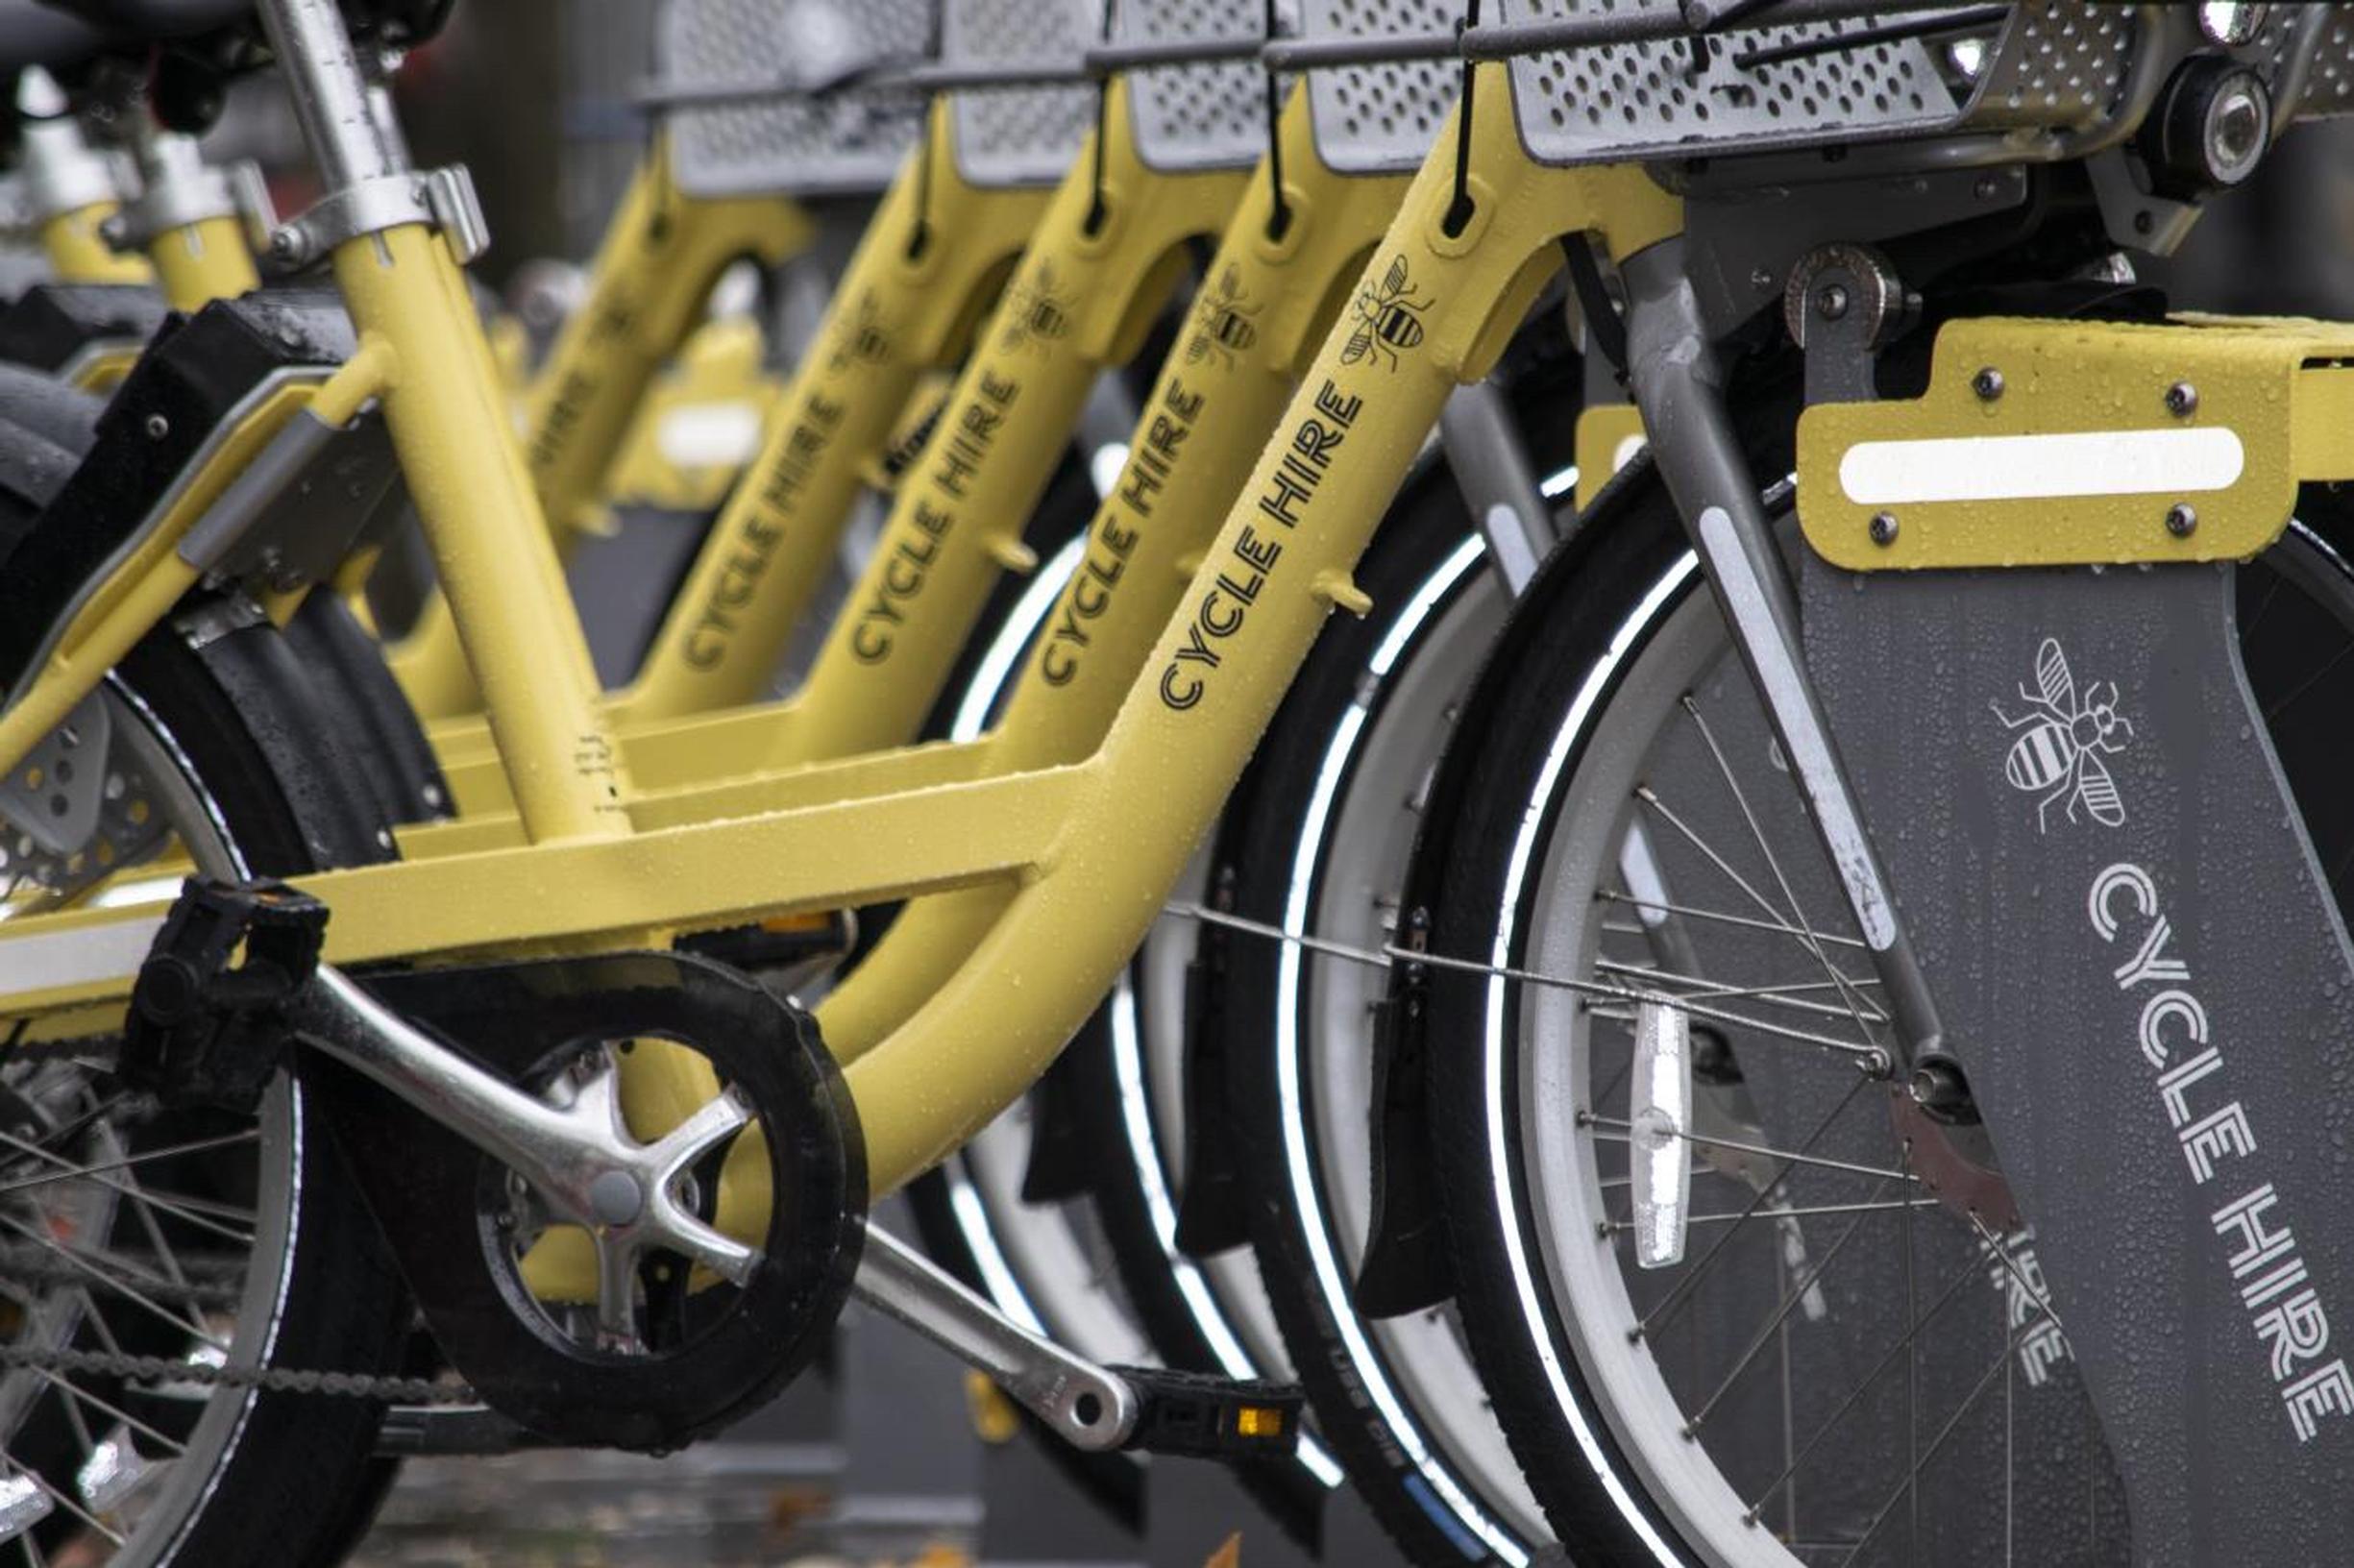 While vandalised bikes are being repaired, Some cycle hire stations will be suspended temporarily